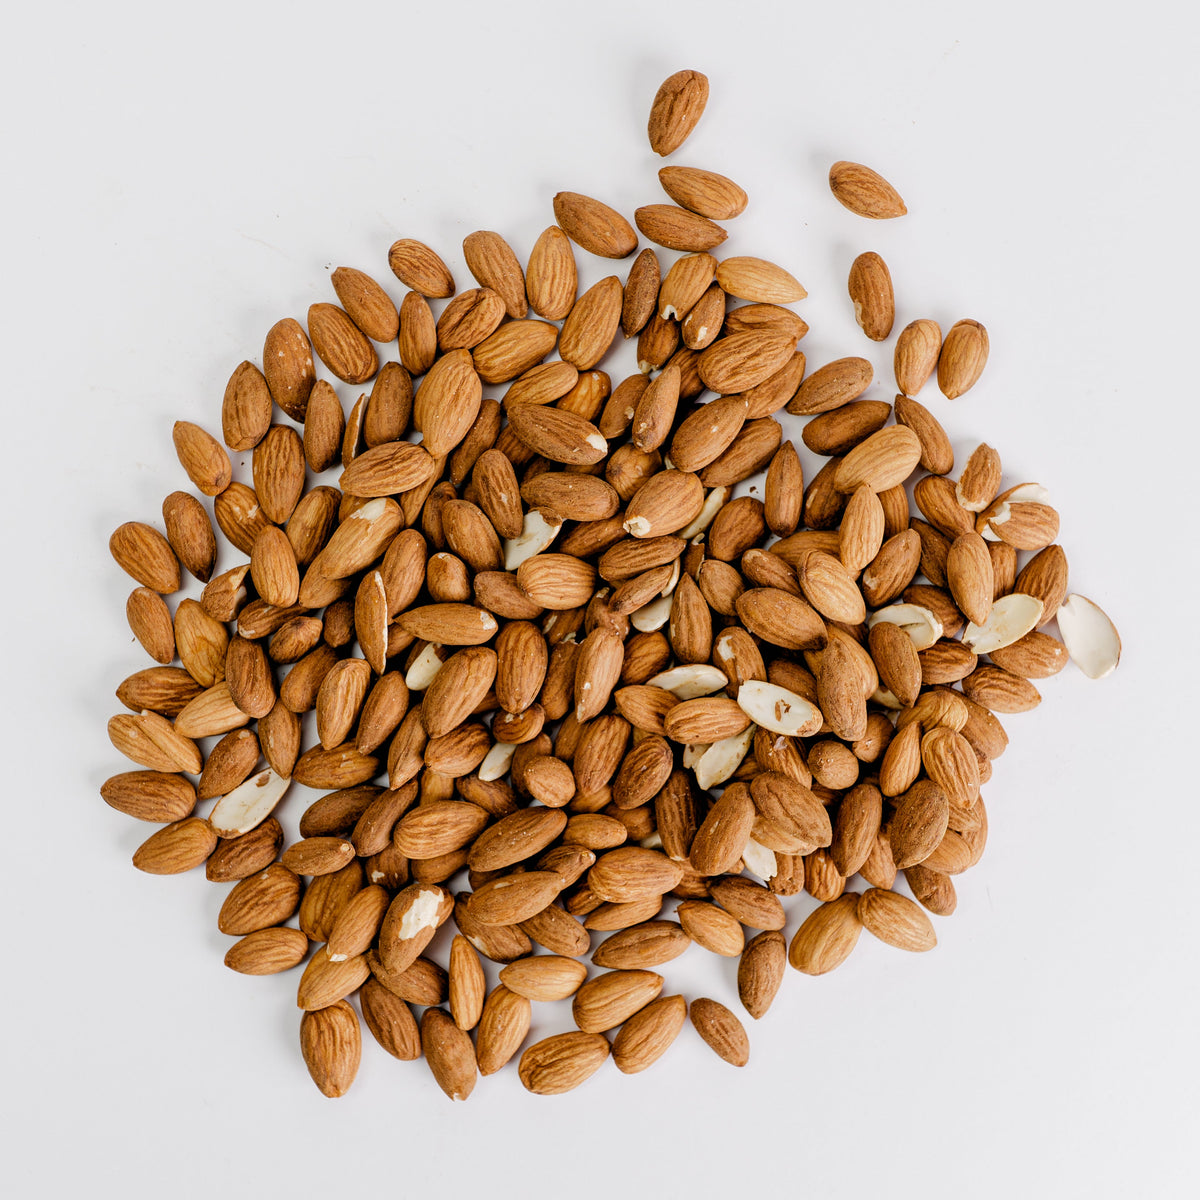 Crispy Sprouted Organic Almonds by Dr. Cowan's Garden